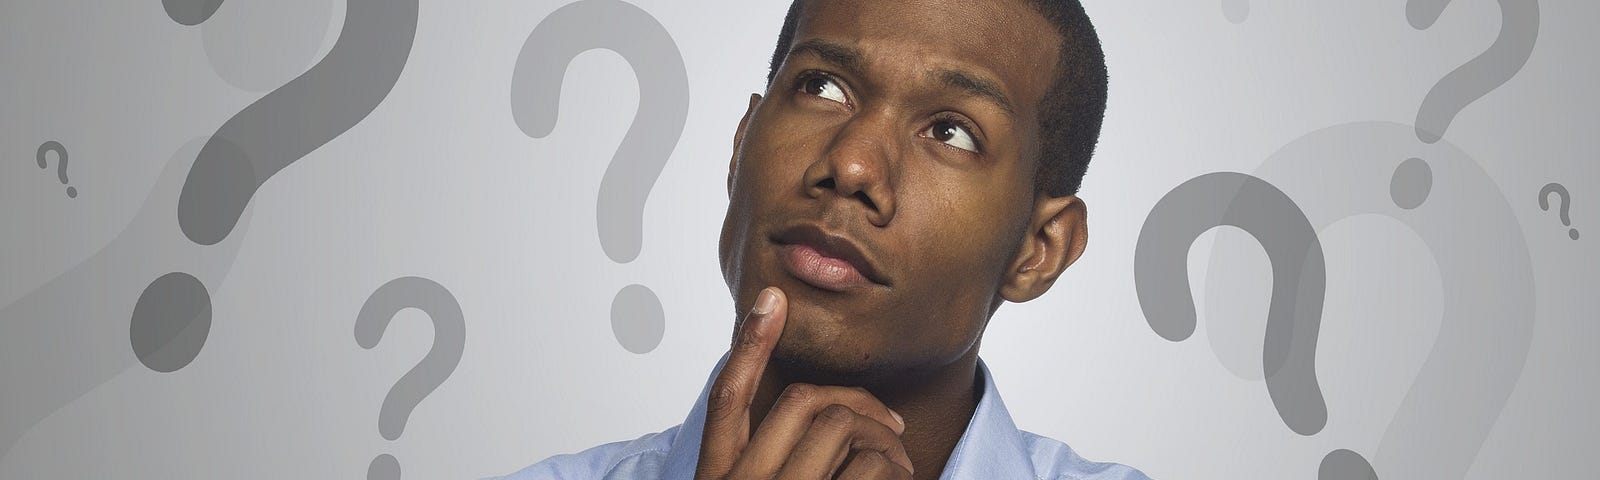 Man Of African Descent With Hand On Chin And Pondering With Question Marks In The Background